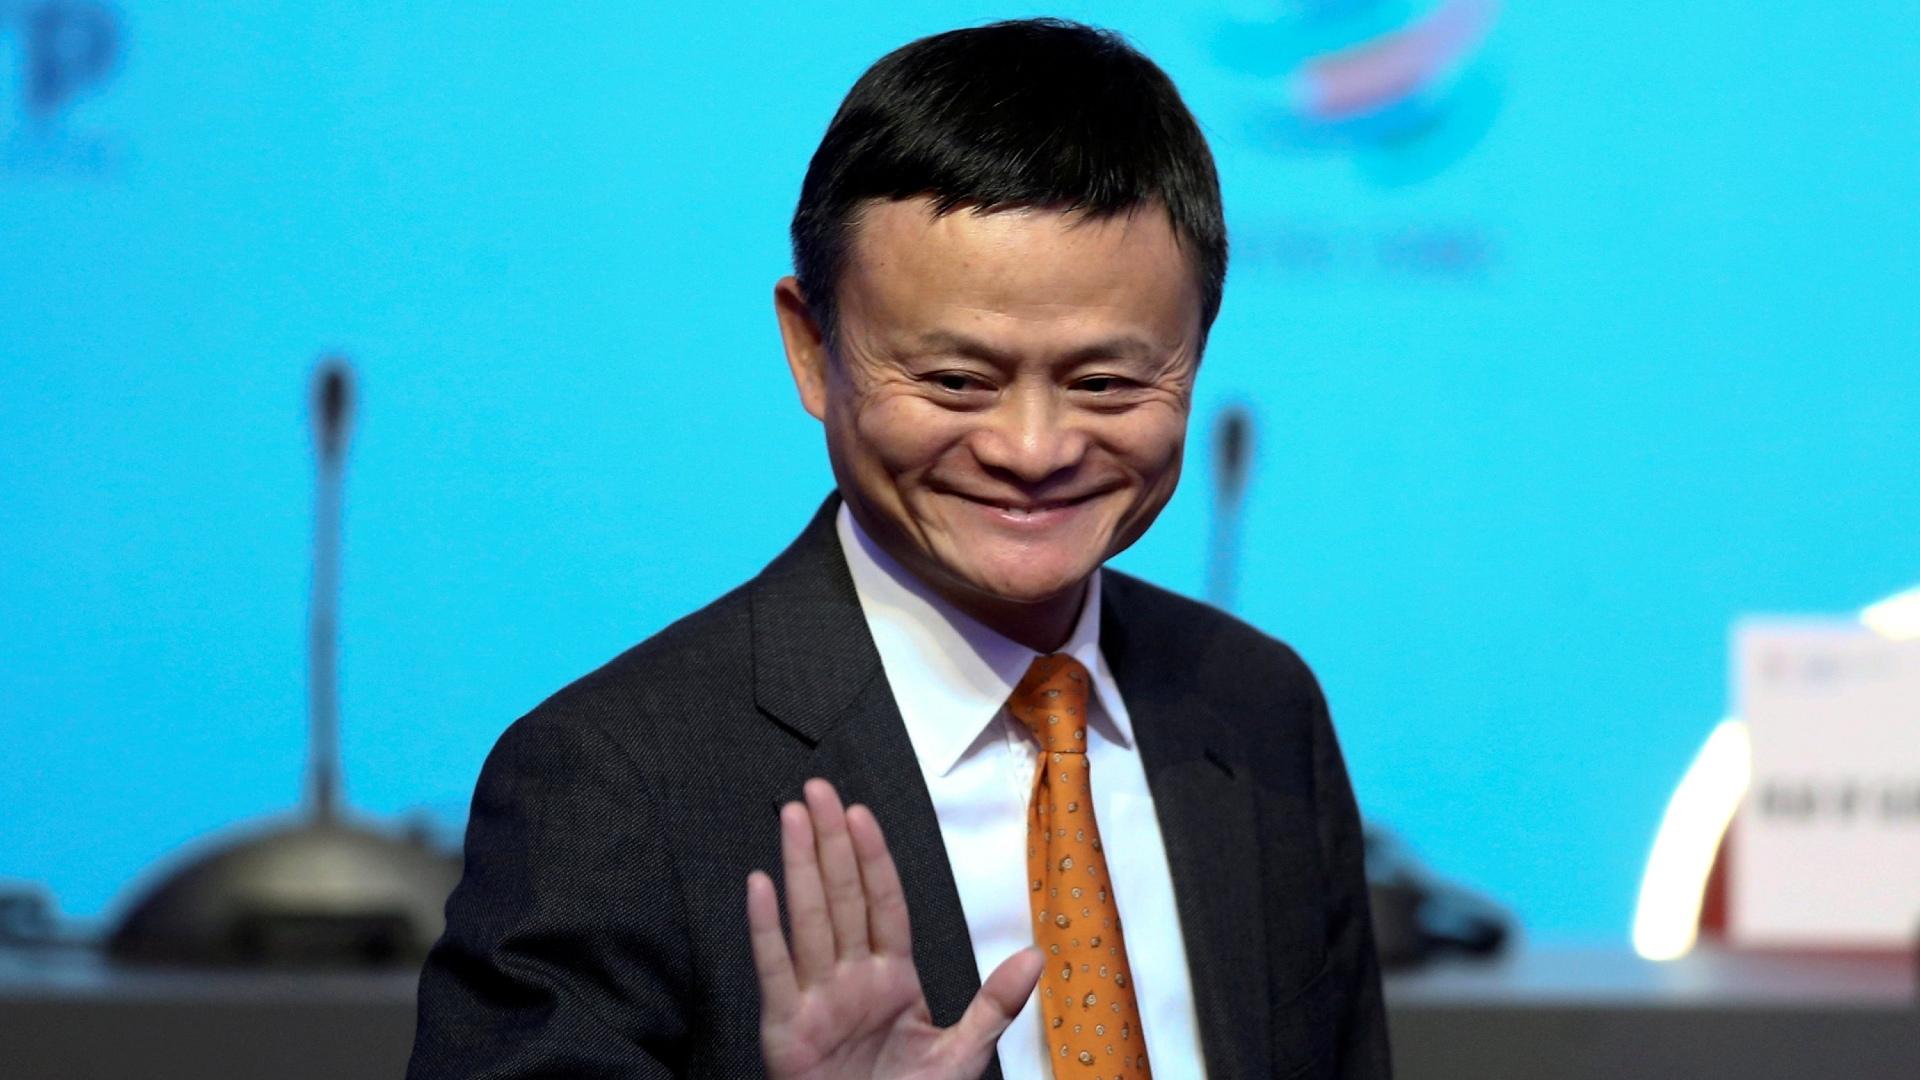 Trump Touts Small Business Action with Alibaba's Jack Ma